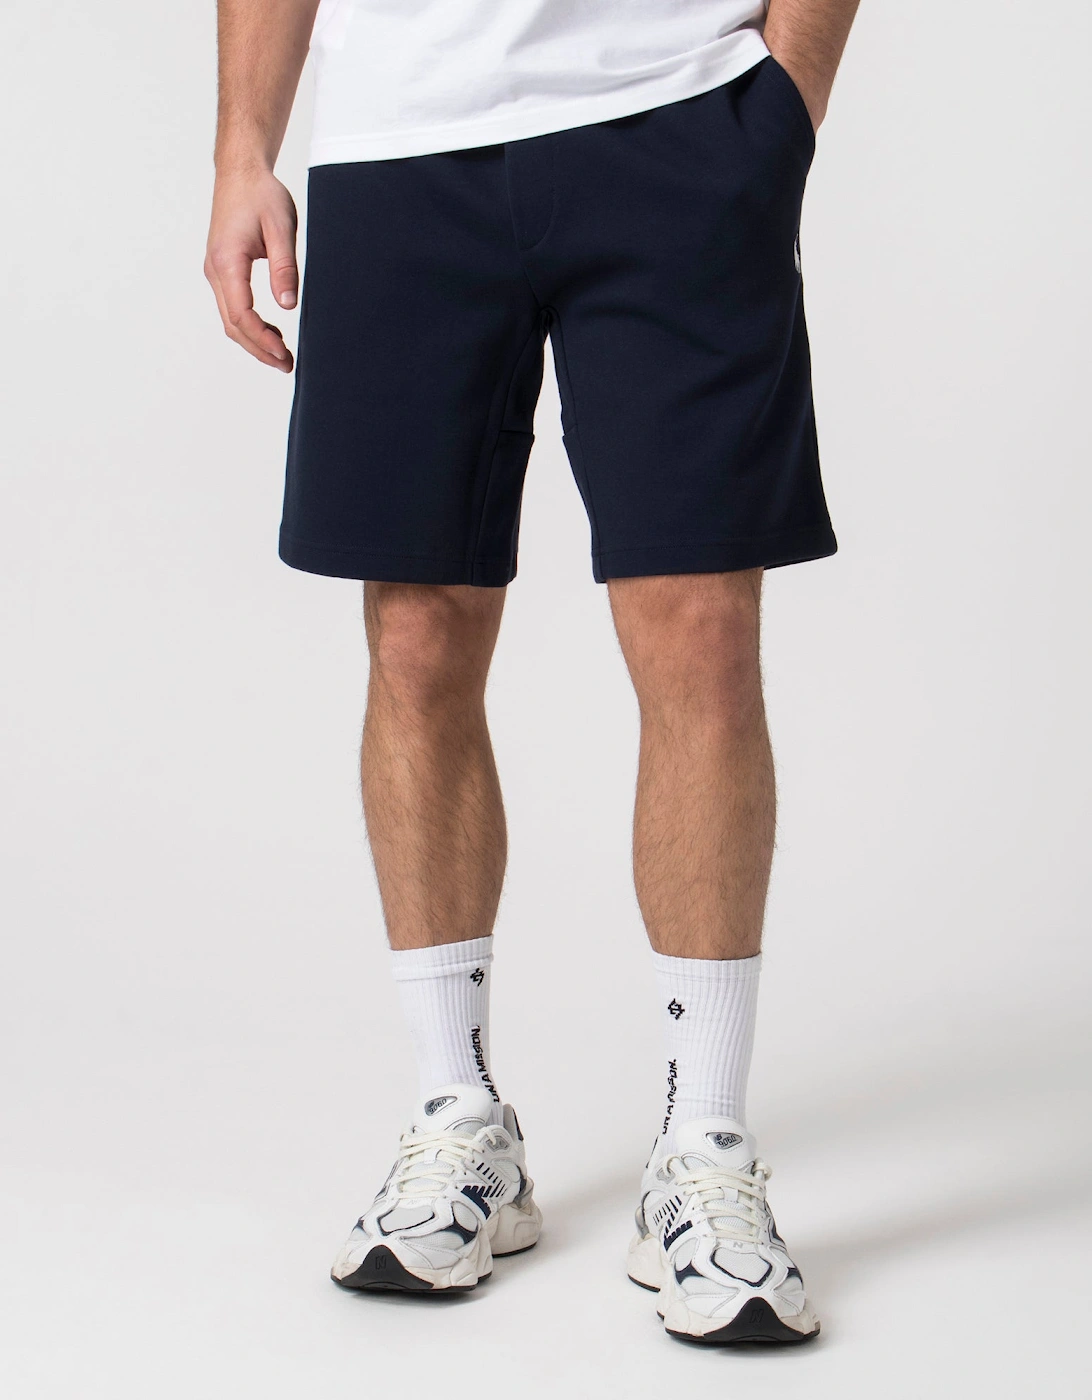 Double Knit Athletic Sweat Shorts